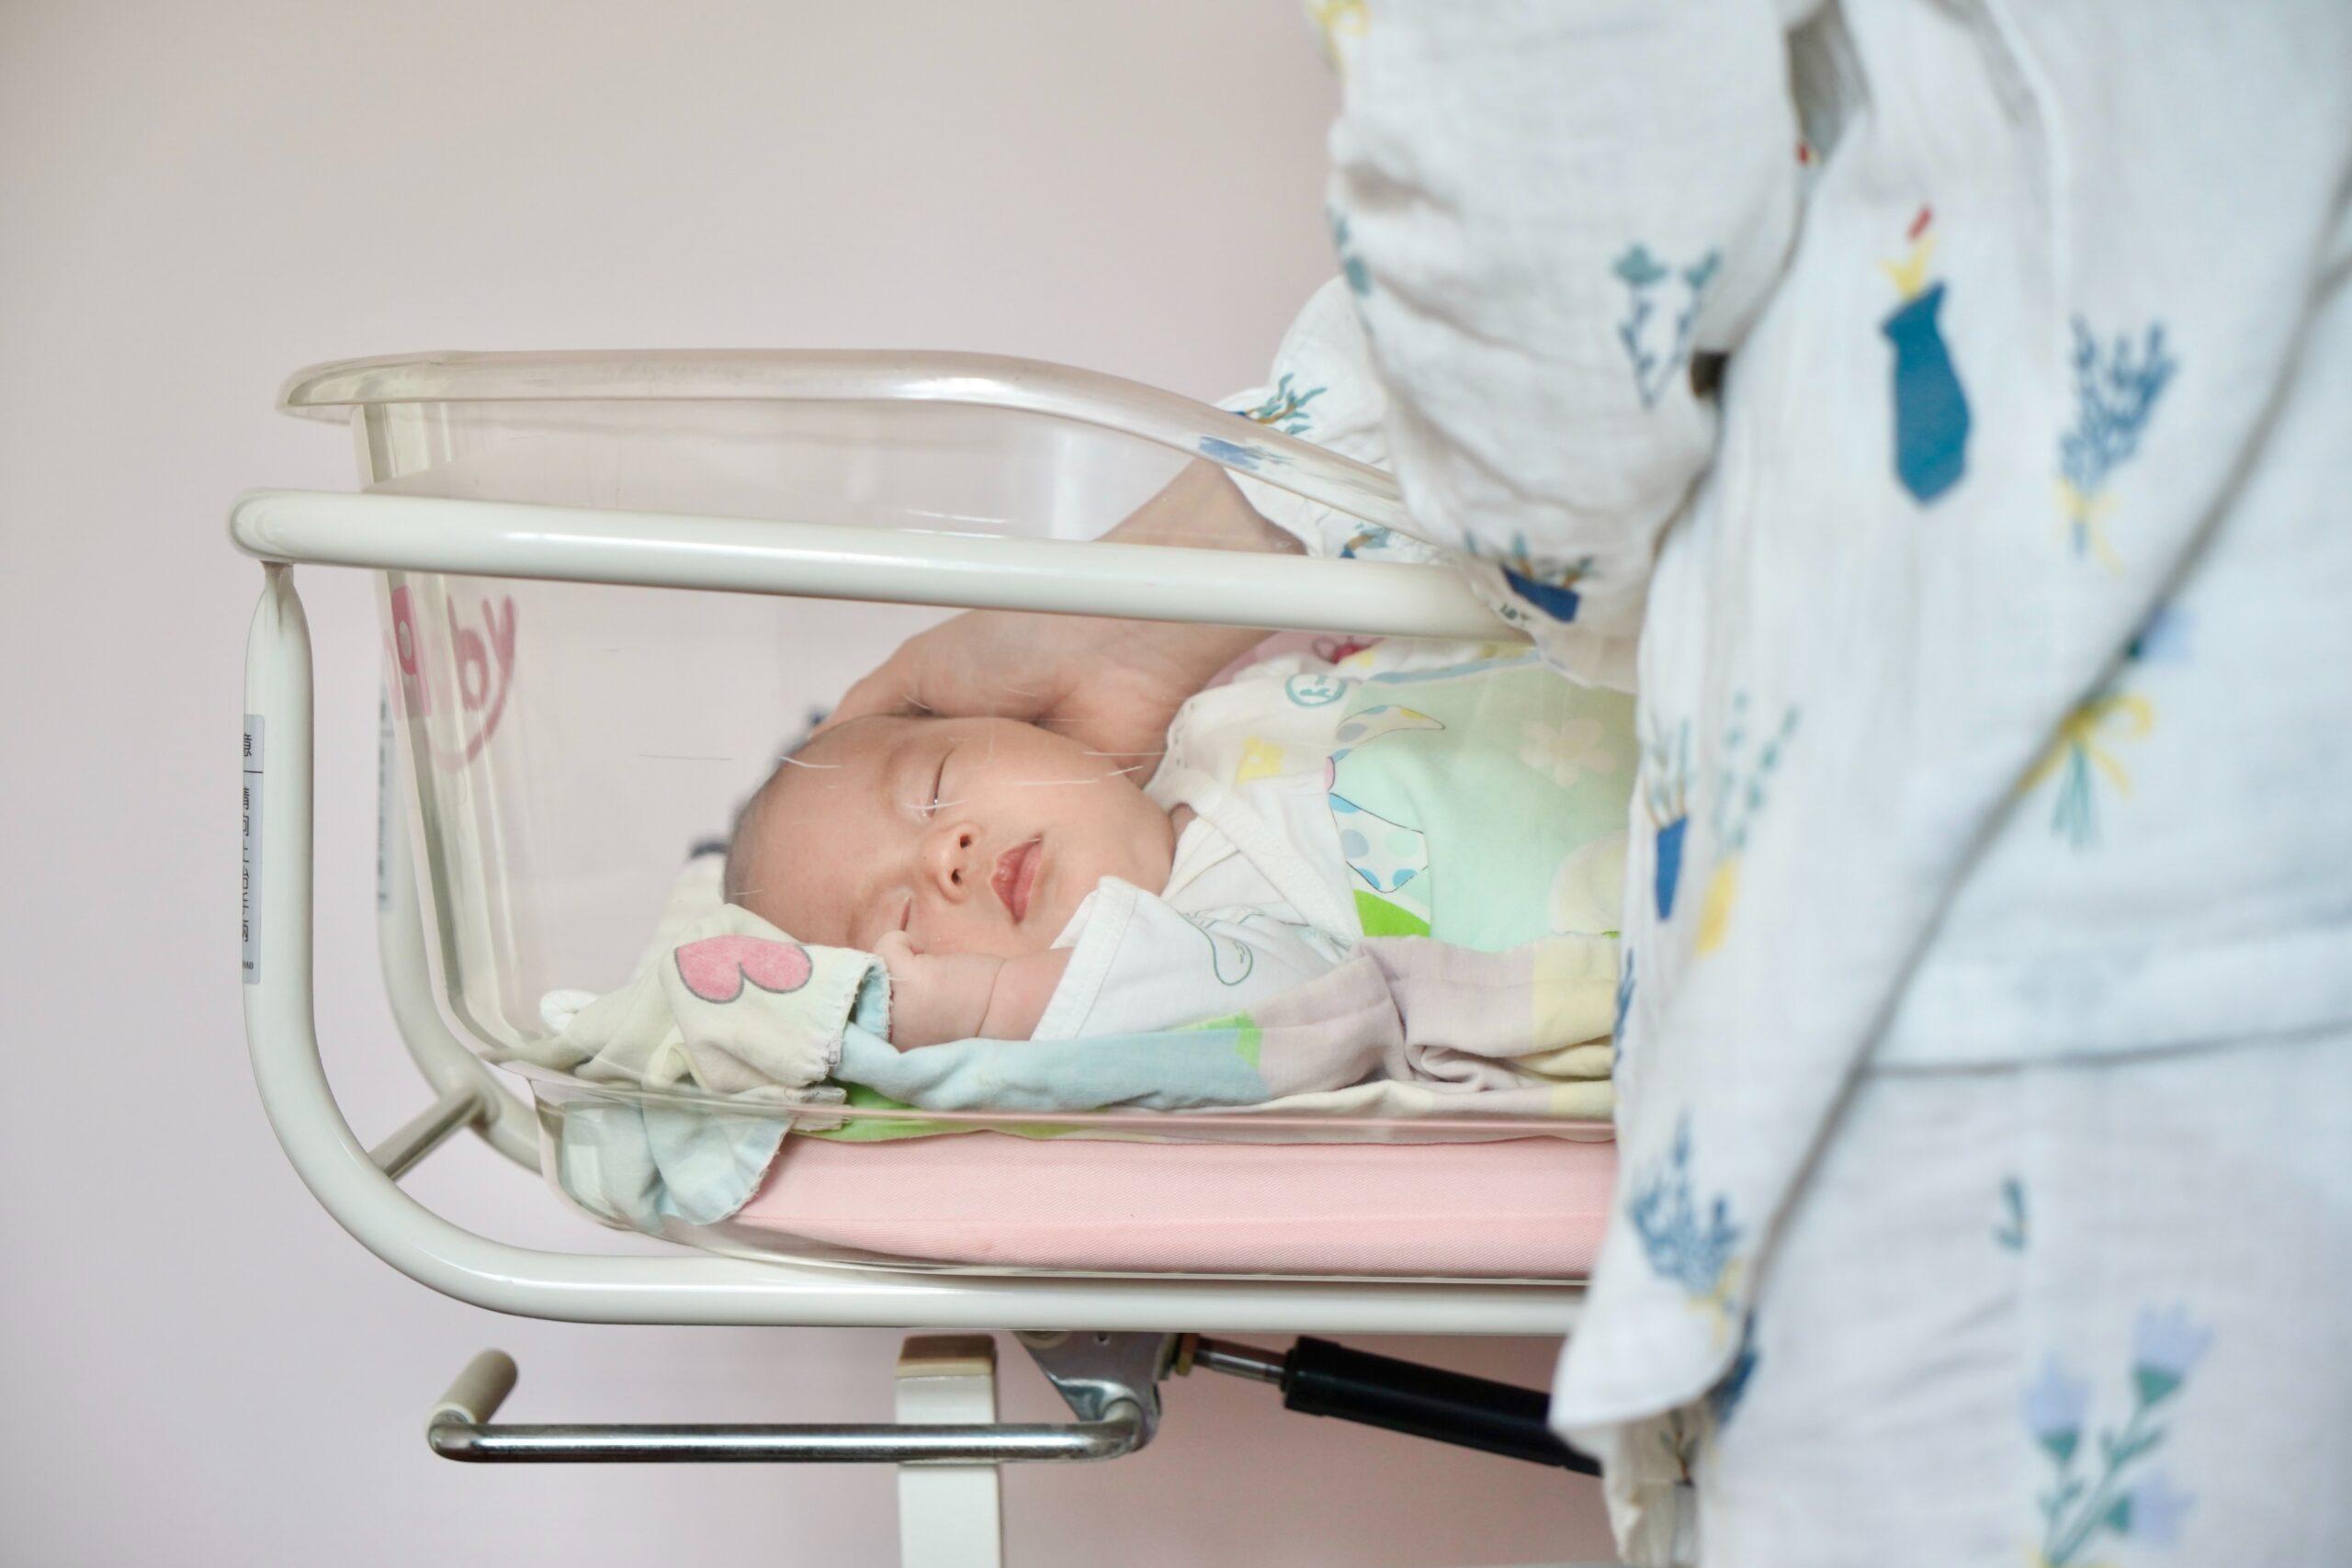 CDC recommends new tool to protect infants from…